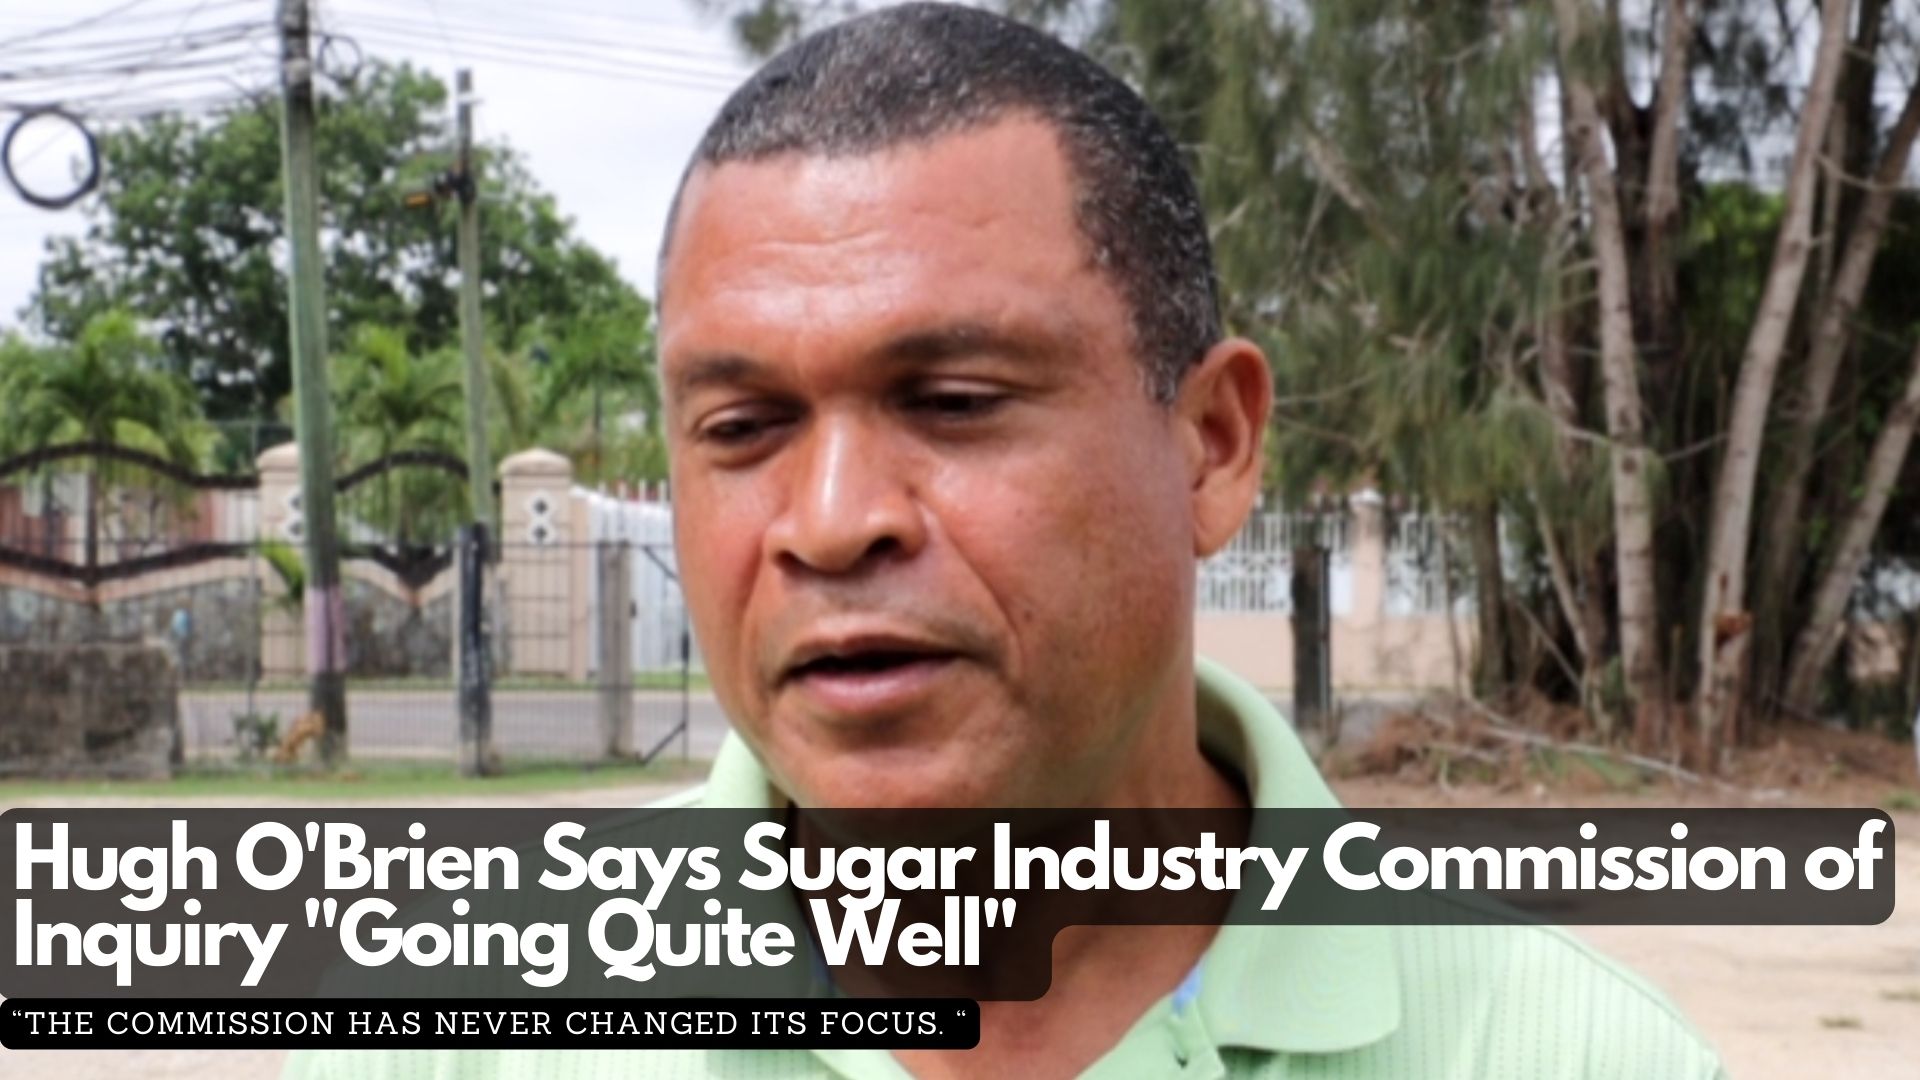 Hugh O'Brien Says Sugar Industry Commission of Inquiry "Going Quite Well" 